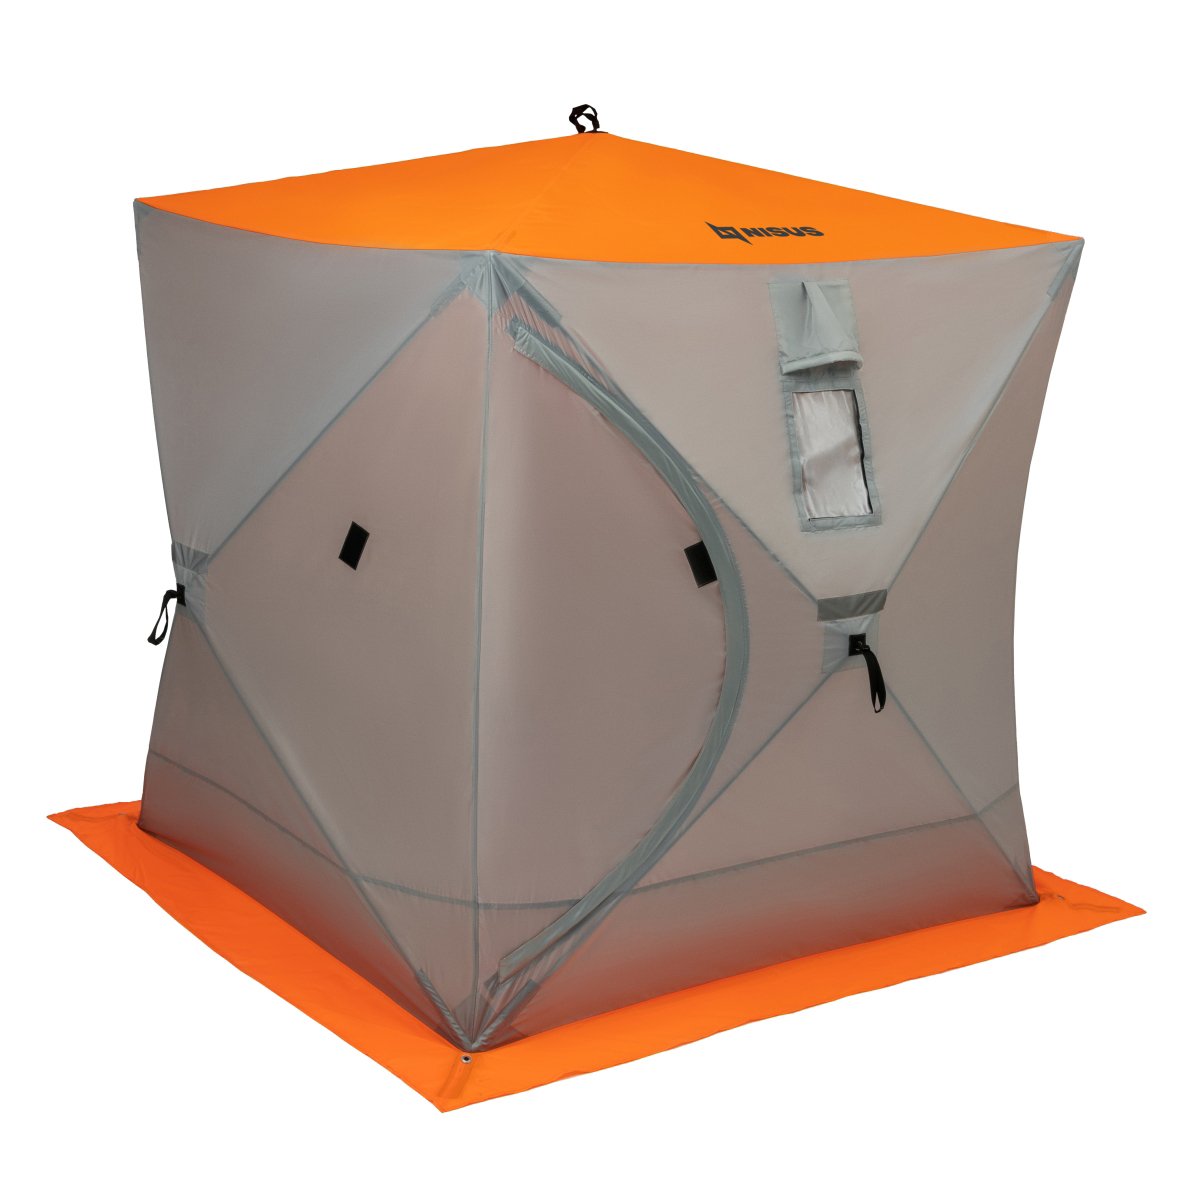 Cube Large Pop-Up Ice Fishing Shelter for 3 Persons, orange and lumi color